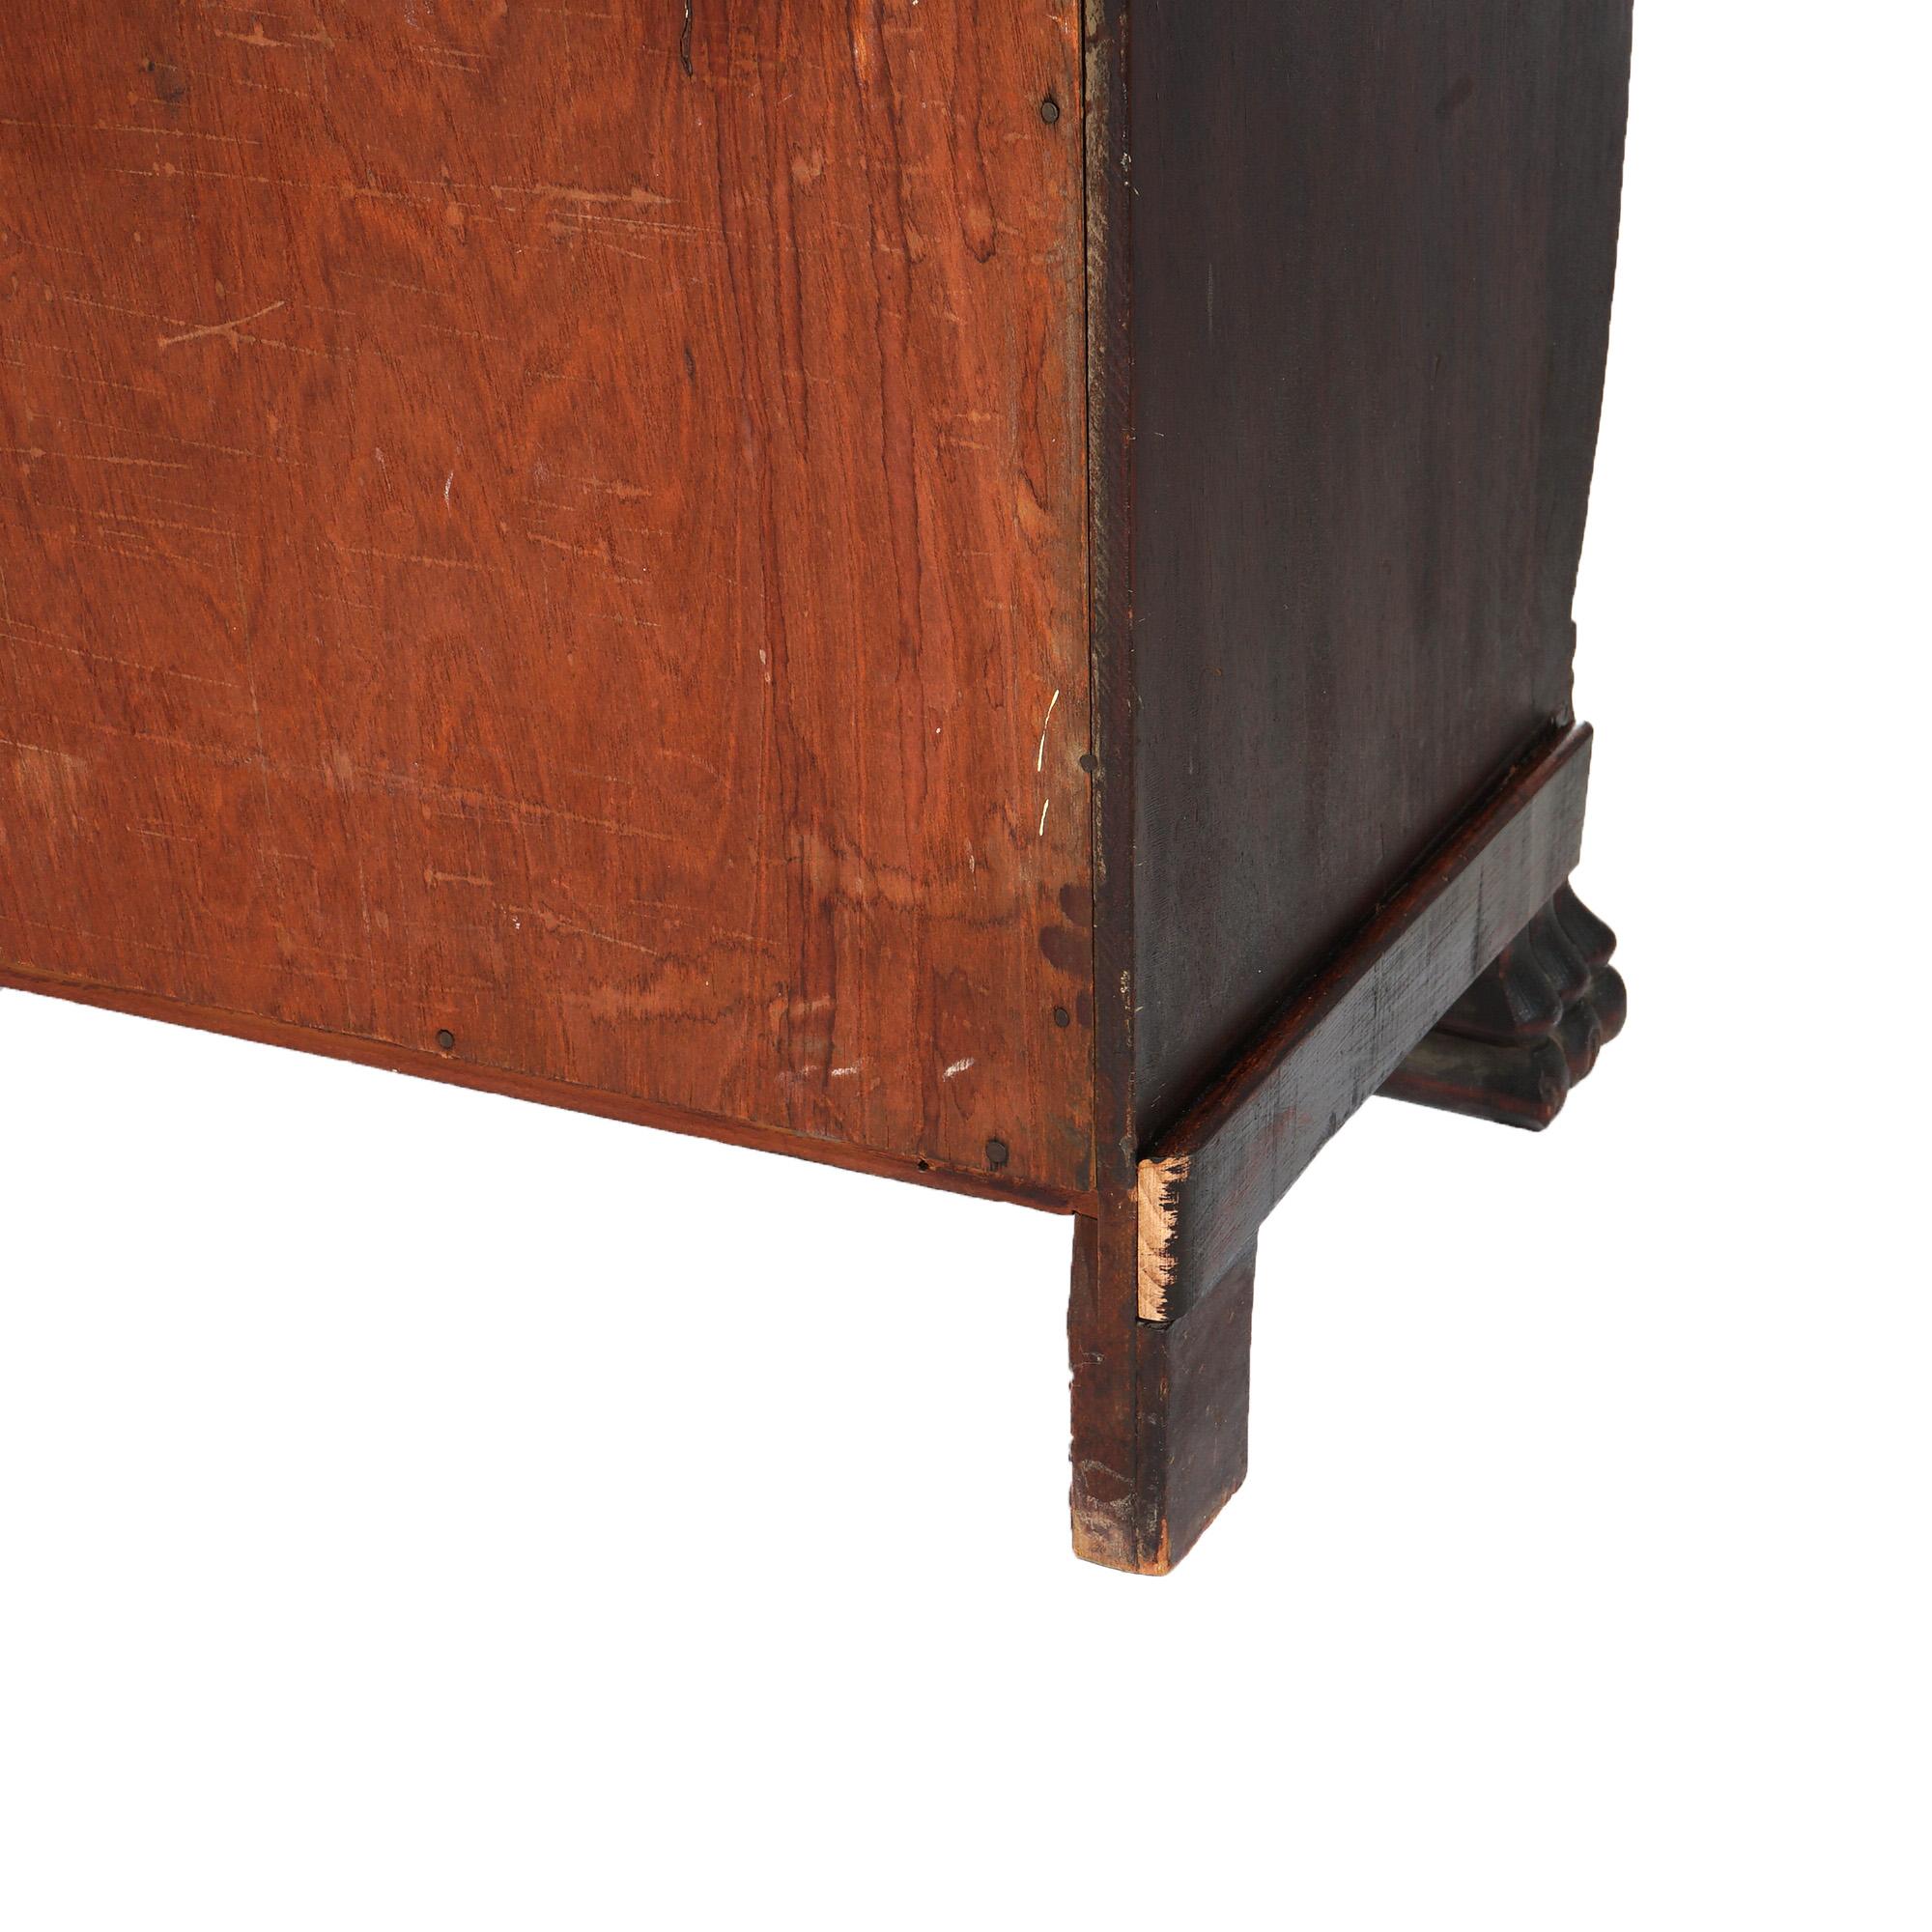 Antique Mahogany Triple Door Leaded Glass Bookcase with Carved Claw Feet C1900 For Sale 13